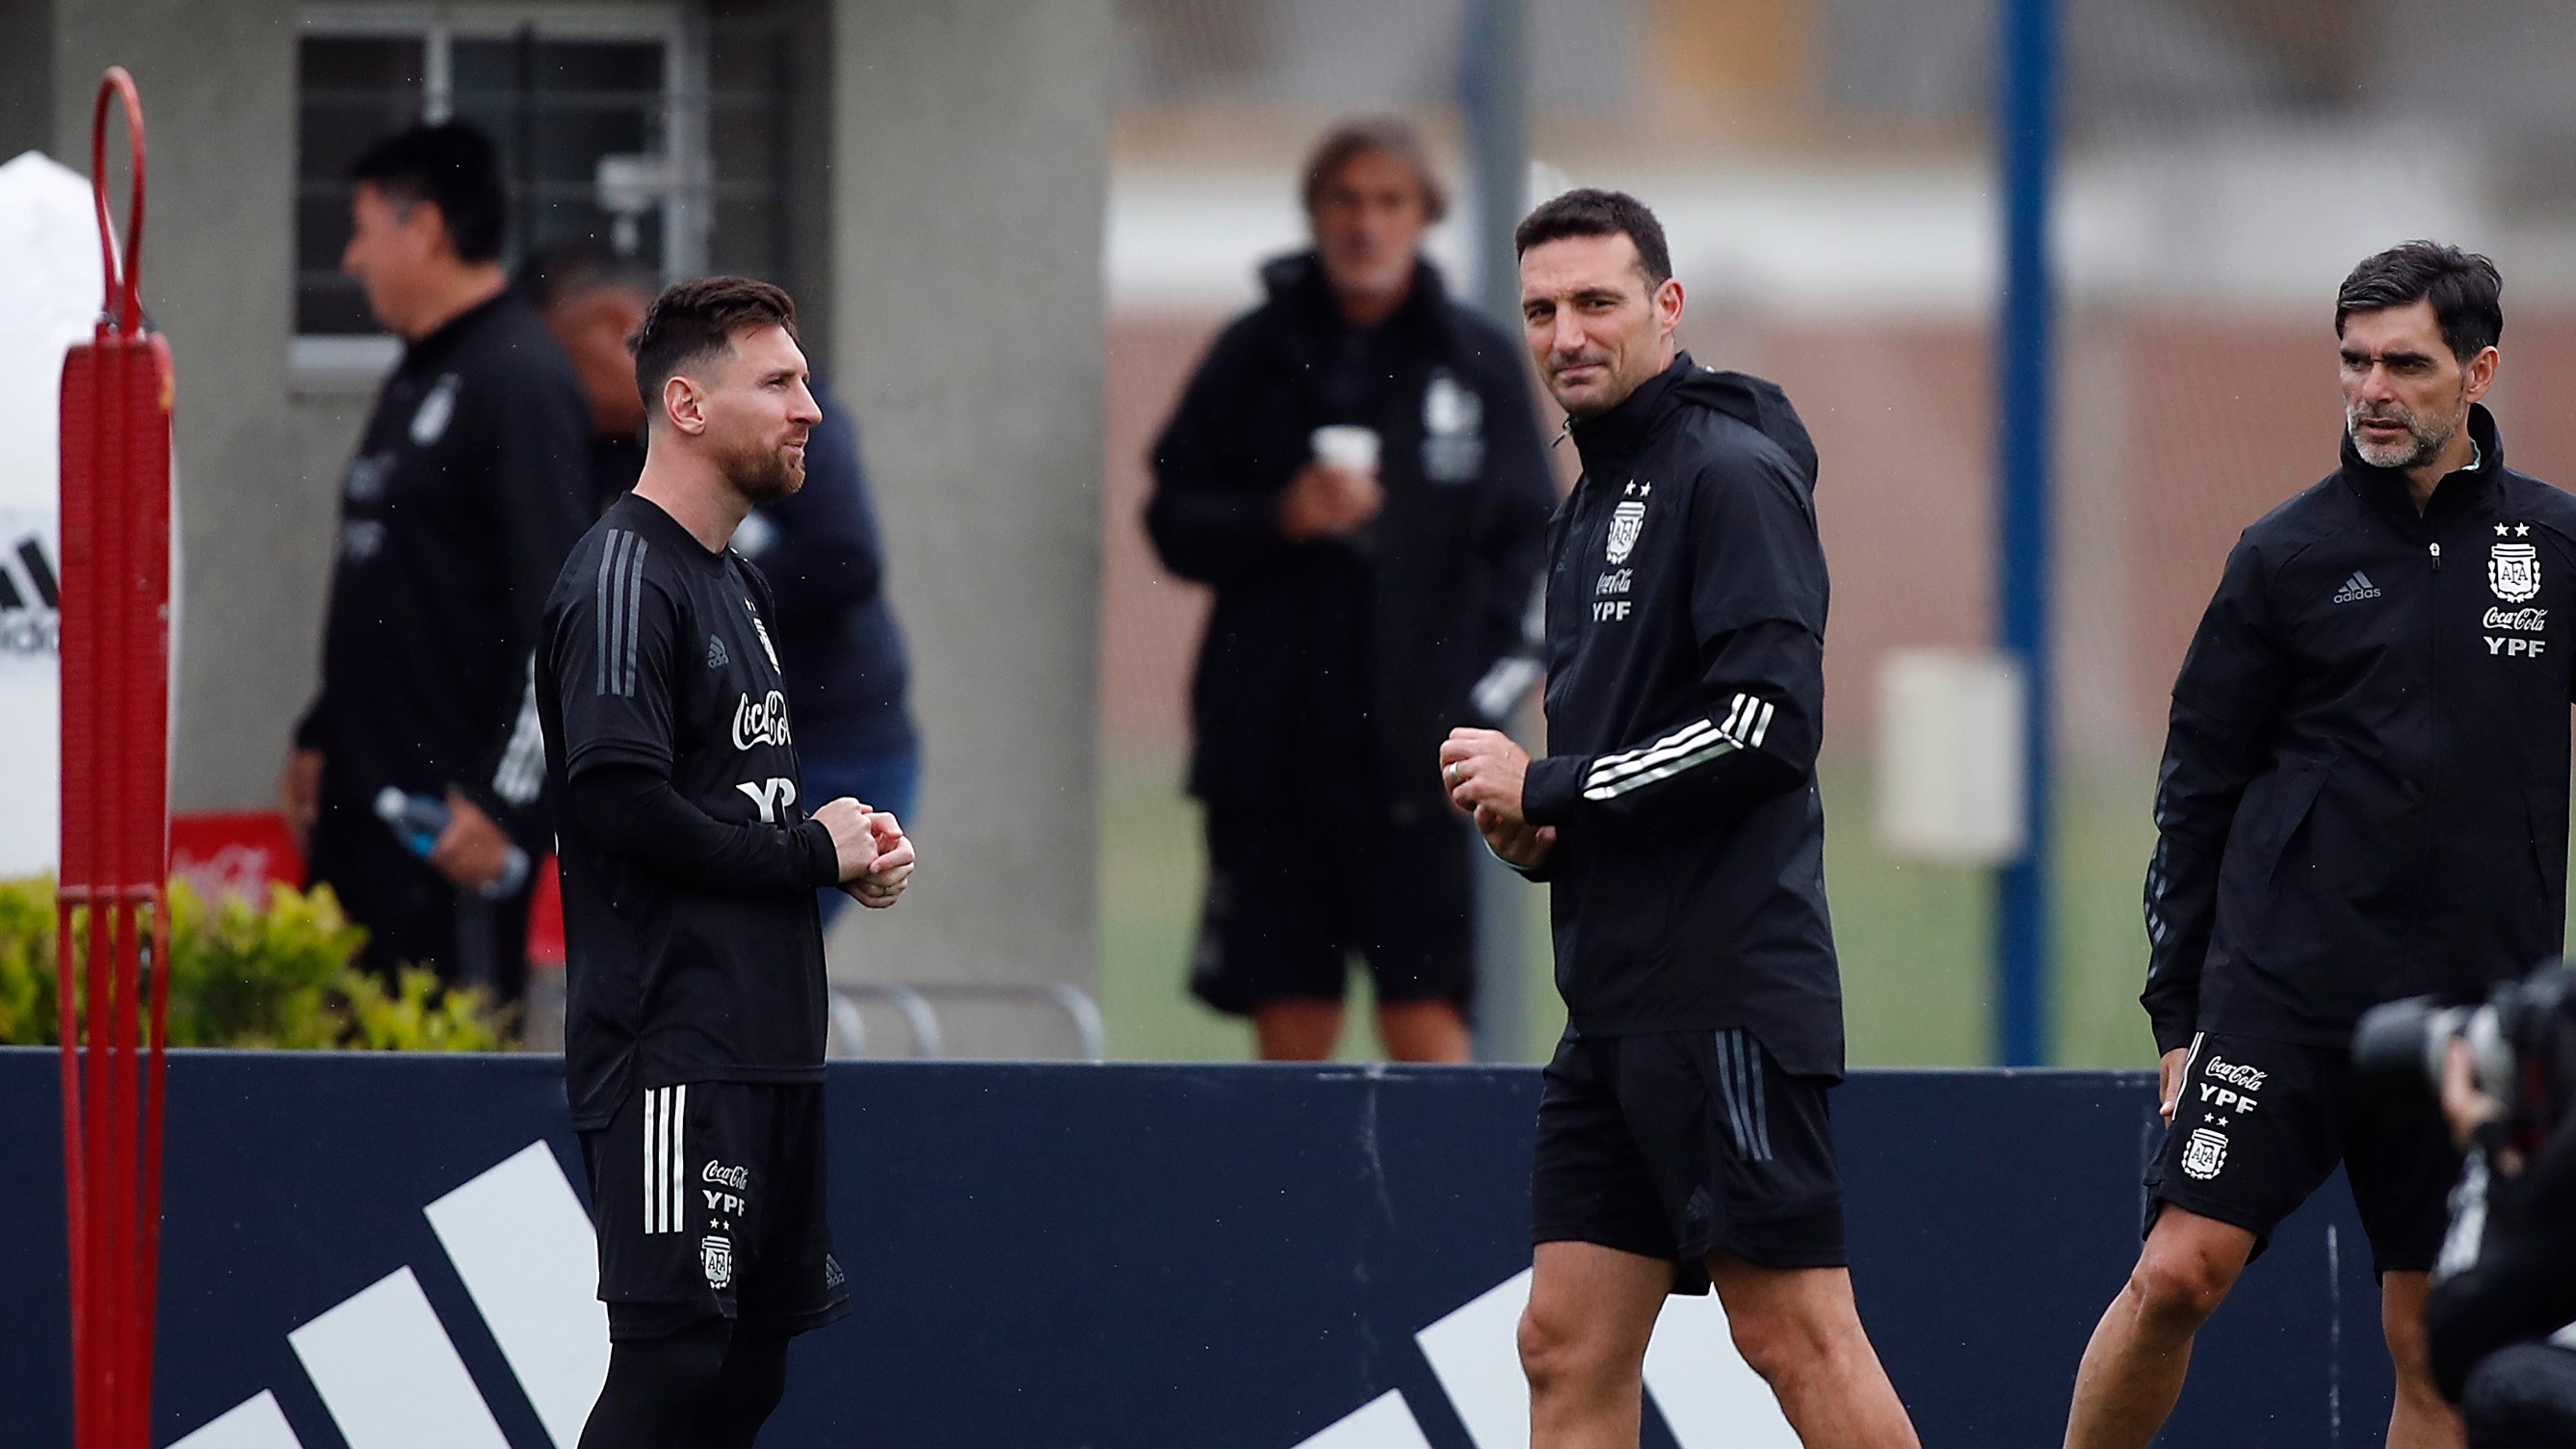 Soccer Football - World Cup - South American Qualifiers - Argentina Training - Julio Humberto Grondona Training Camp, Ezeiza, Argentina - October 13, 2021 Argentina's Lionel Messi with coach Lionel Scaloni during training REUTERS/Agustin Marcarian